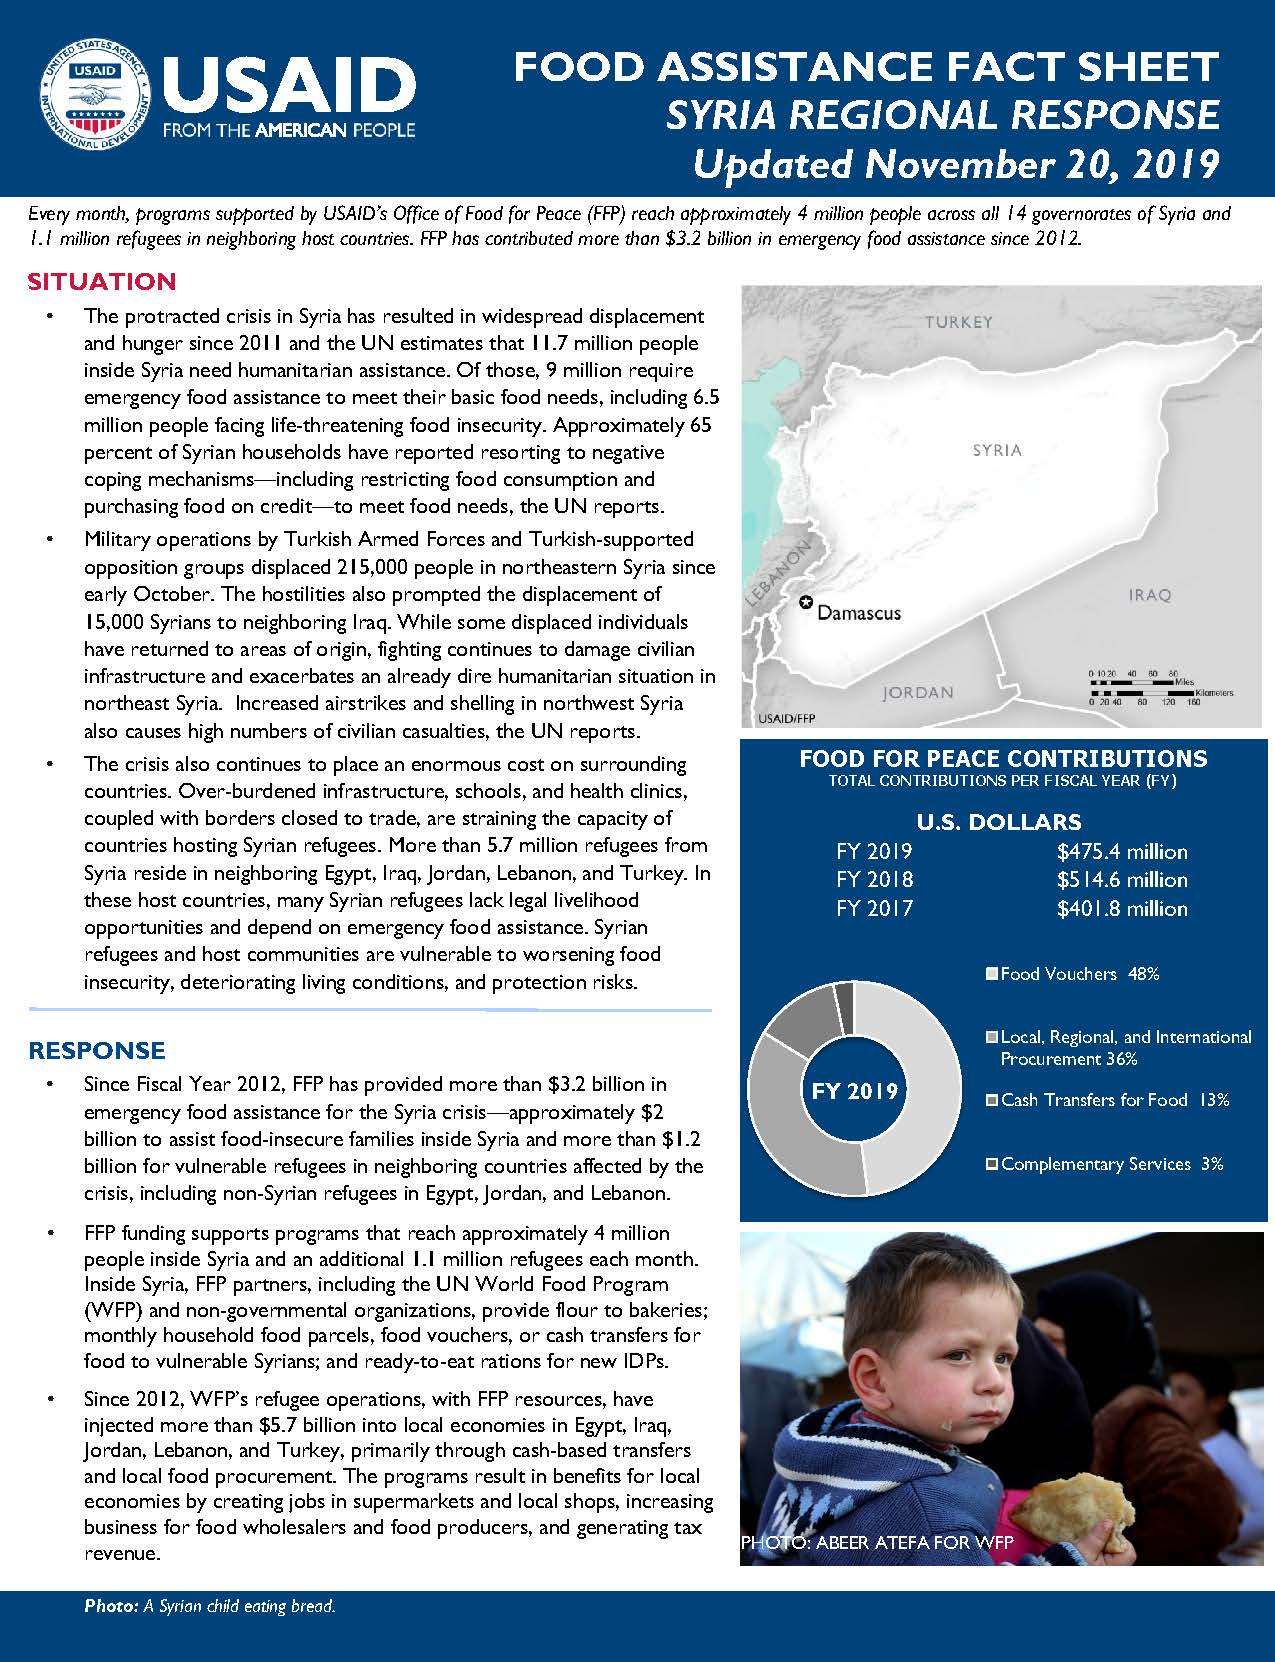 Food Assistance Fact Sheet - Syria